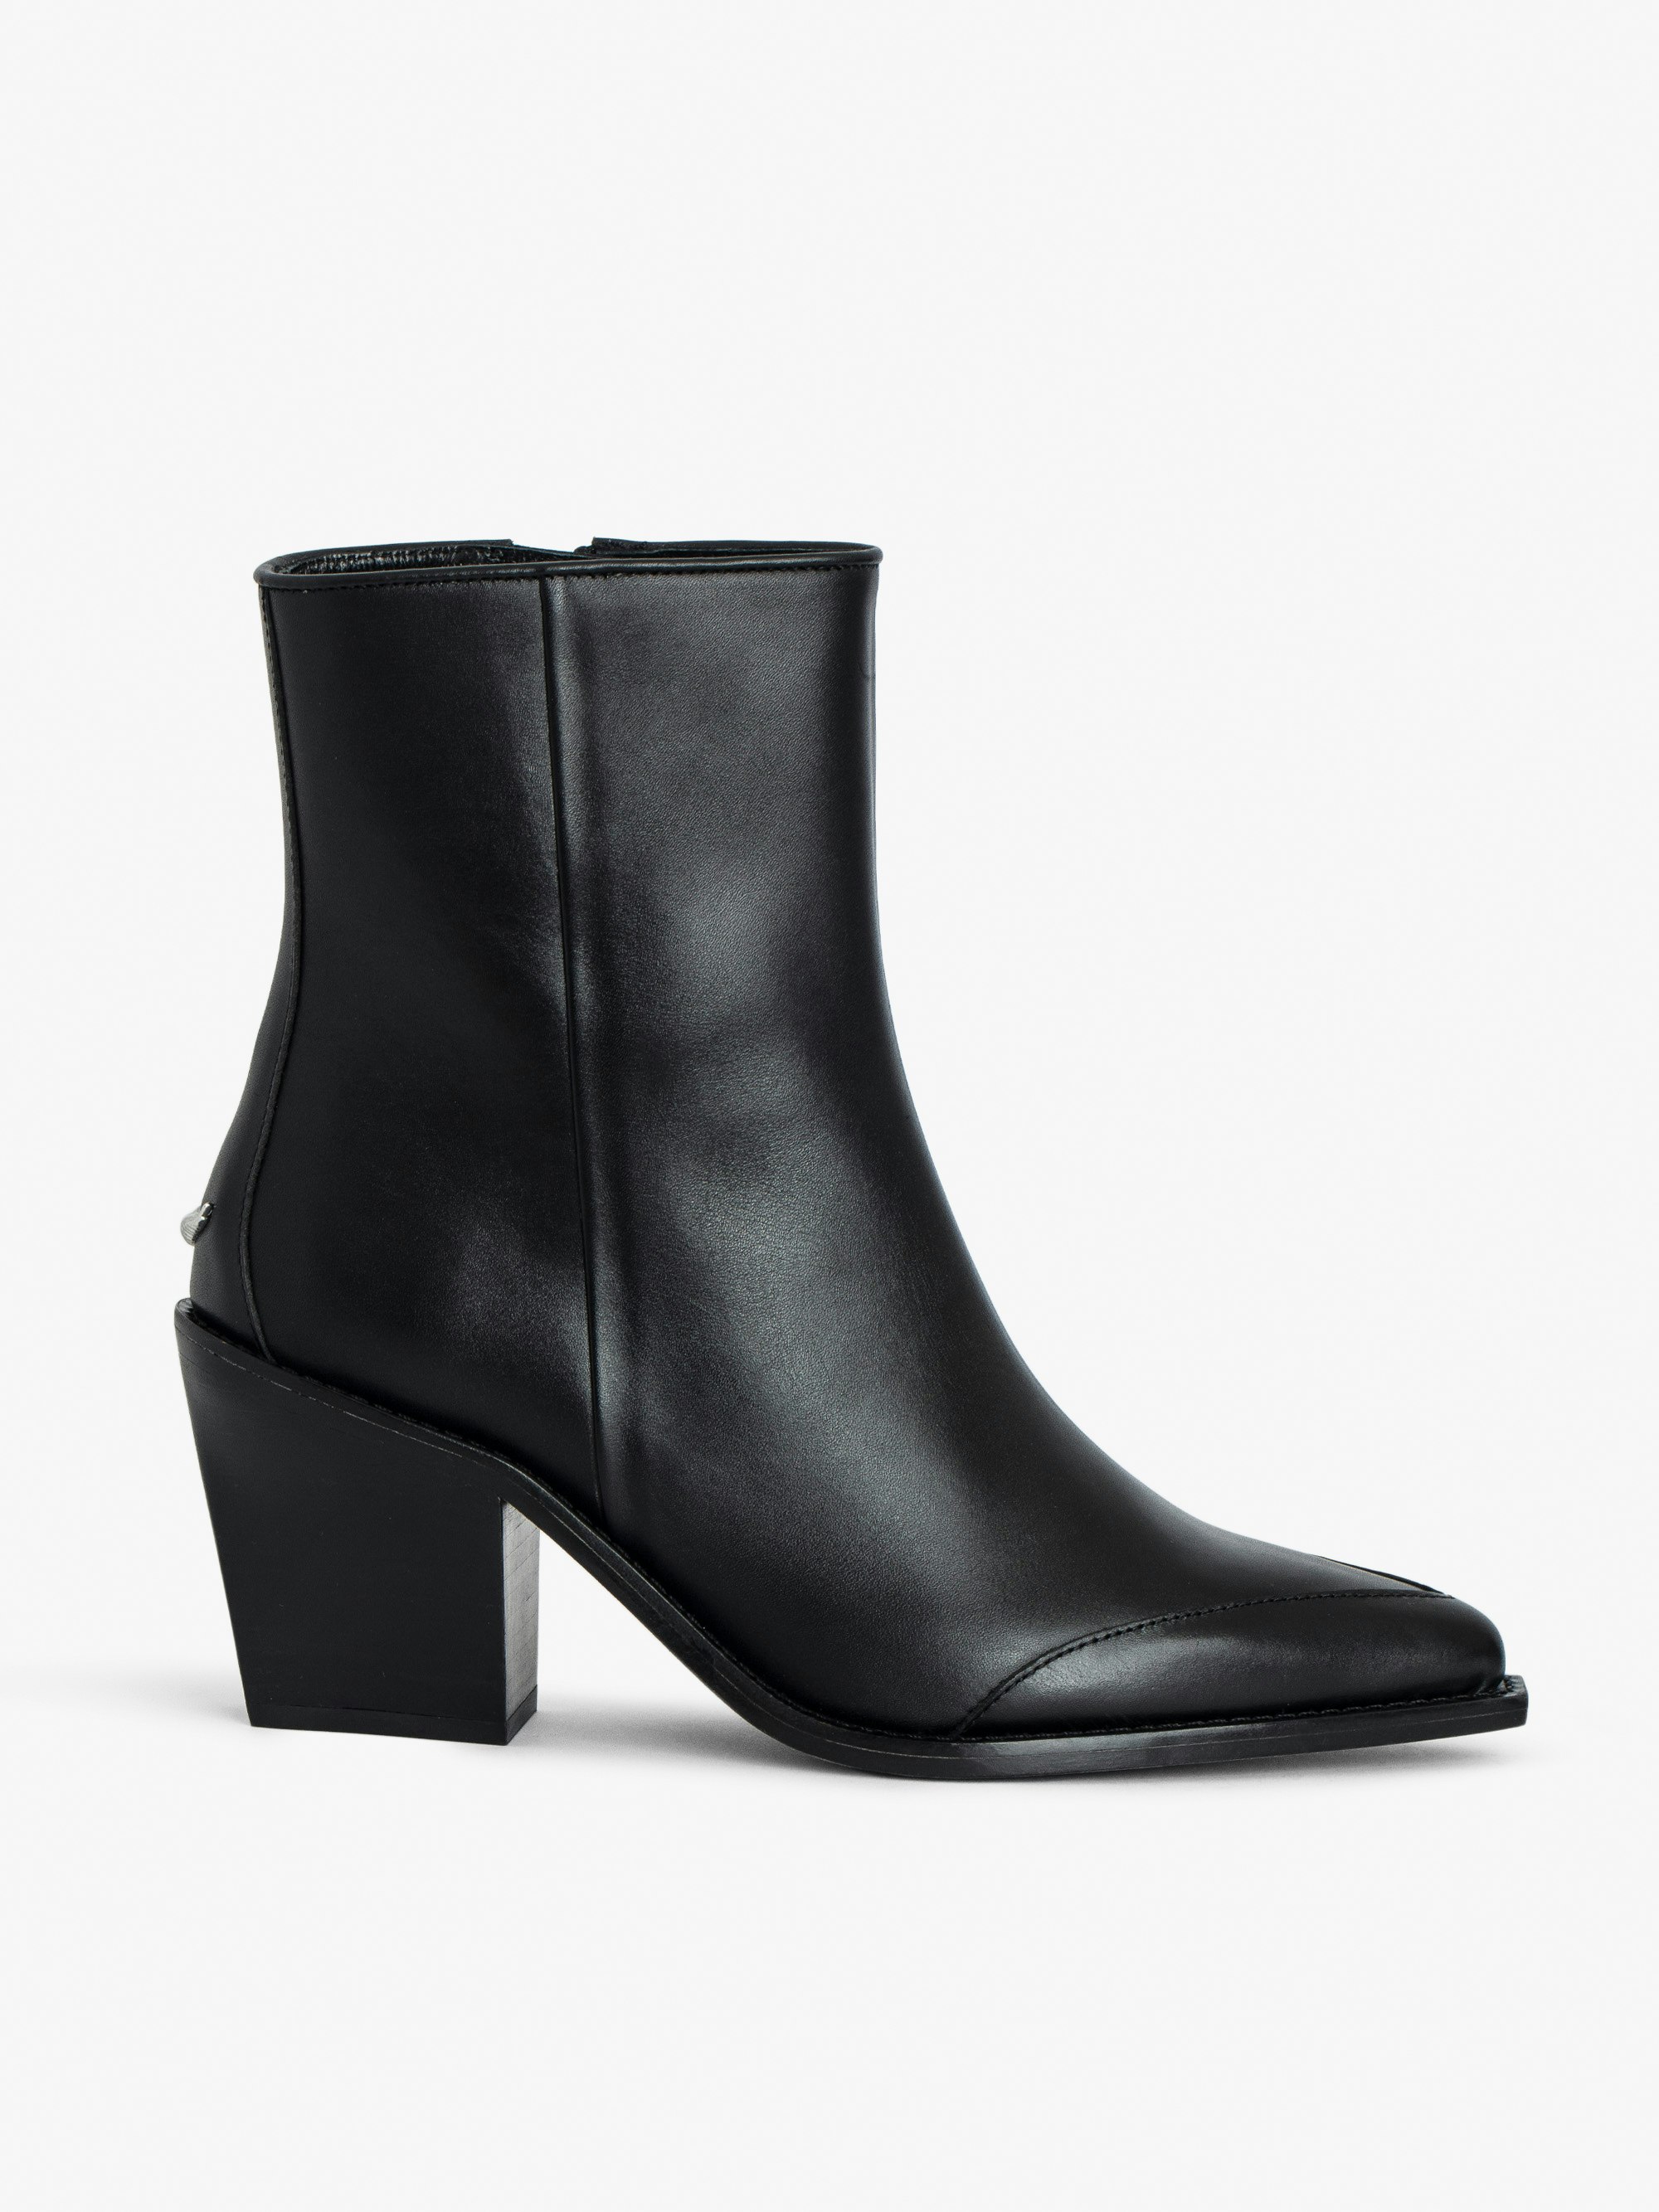 Cara Ankle Boots - Smooth, semi-patent black leather ankle boots with signature wings.